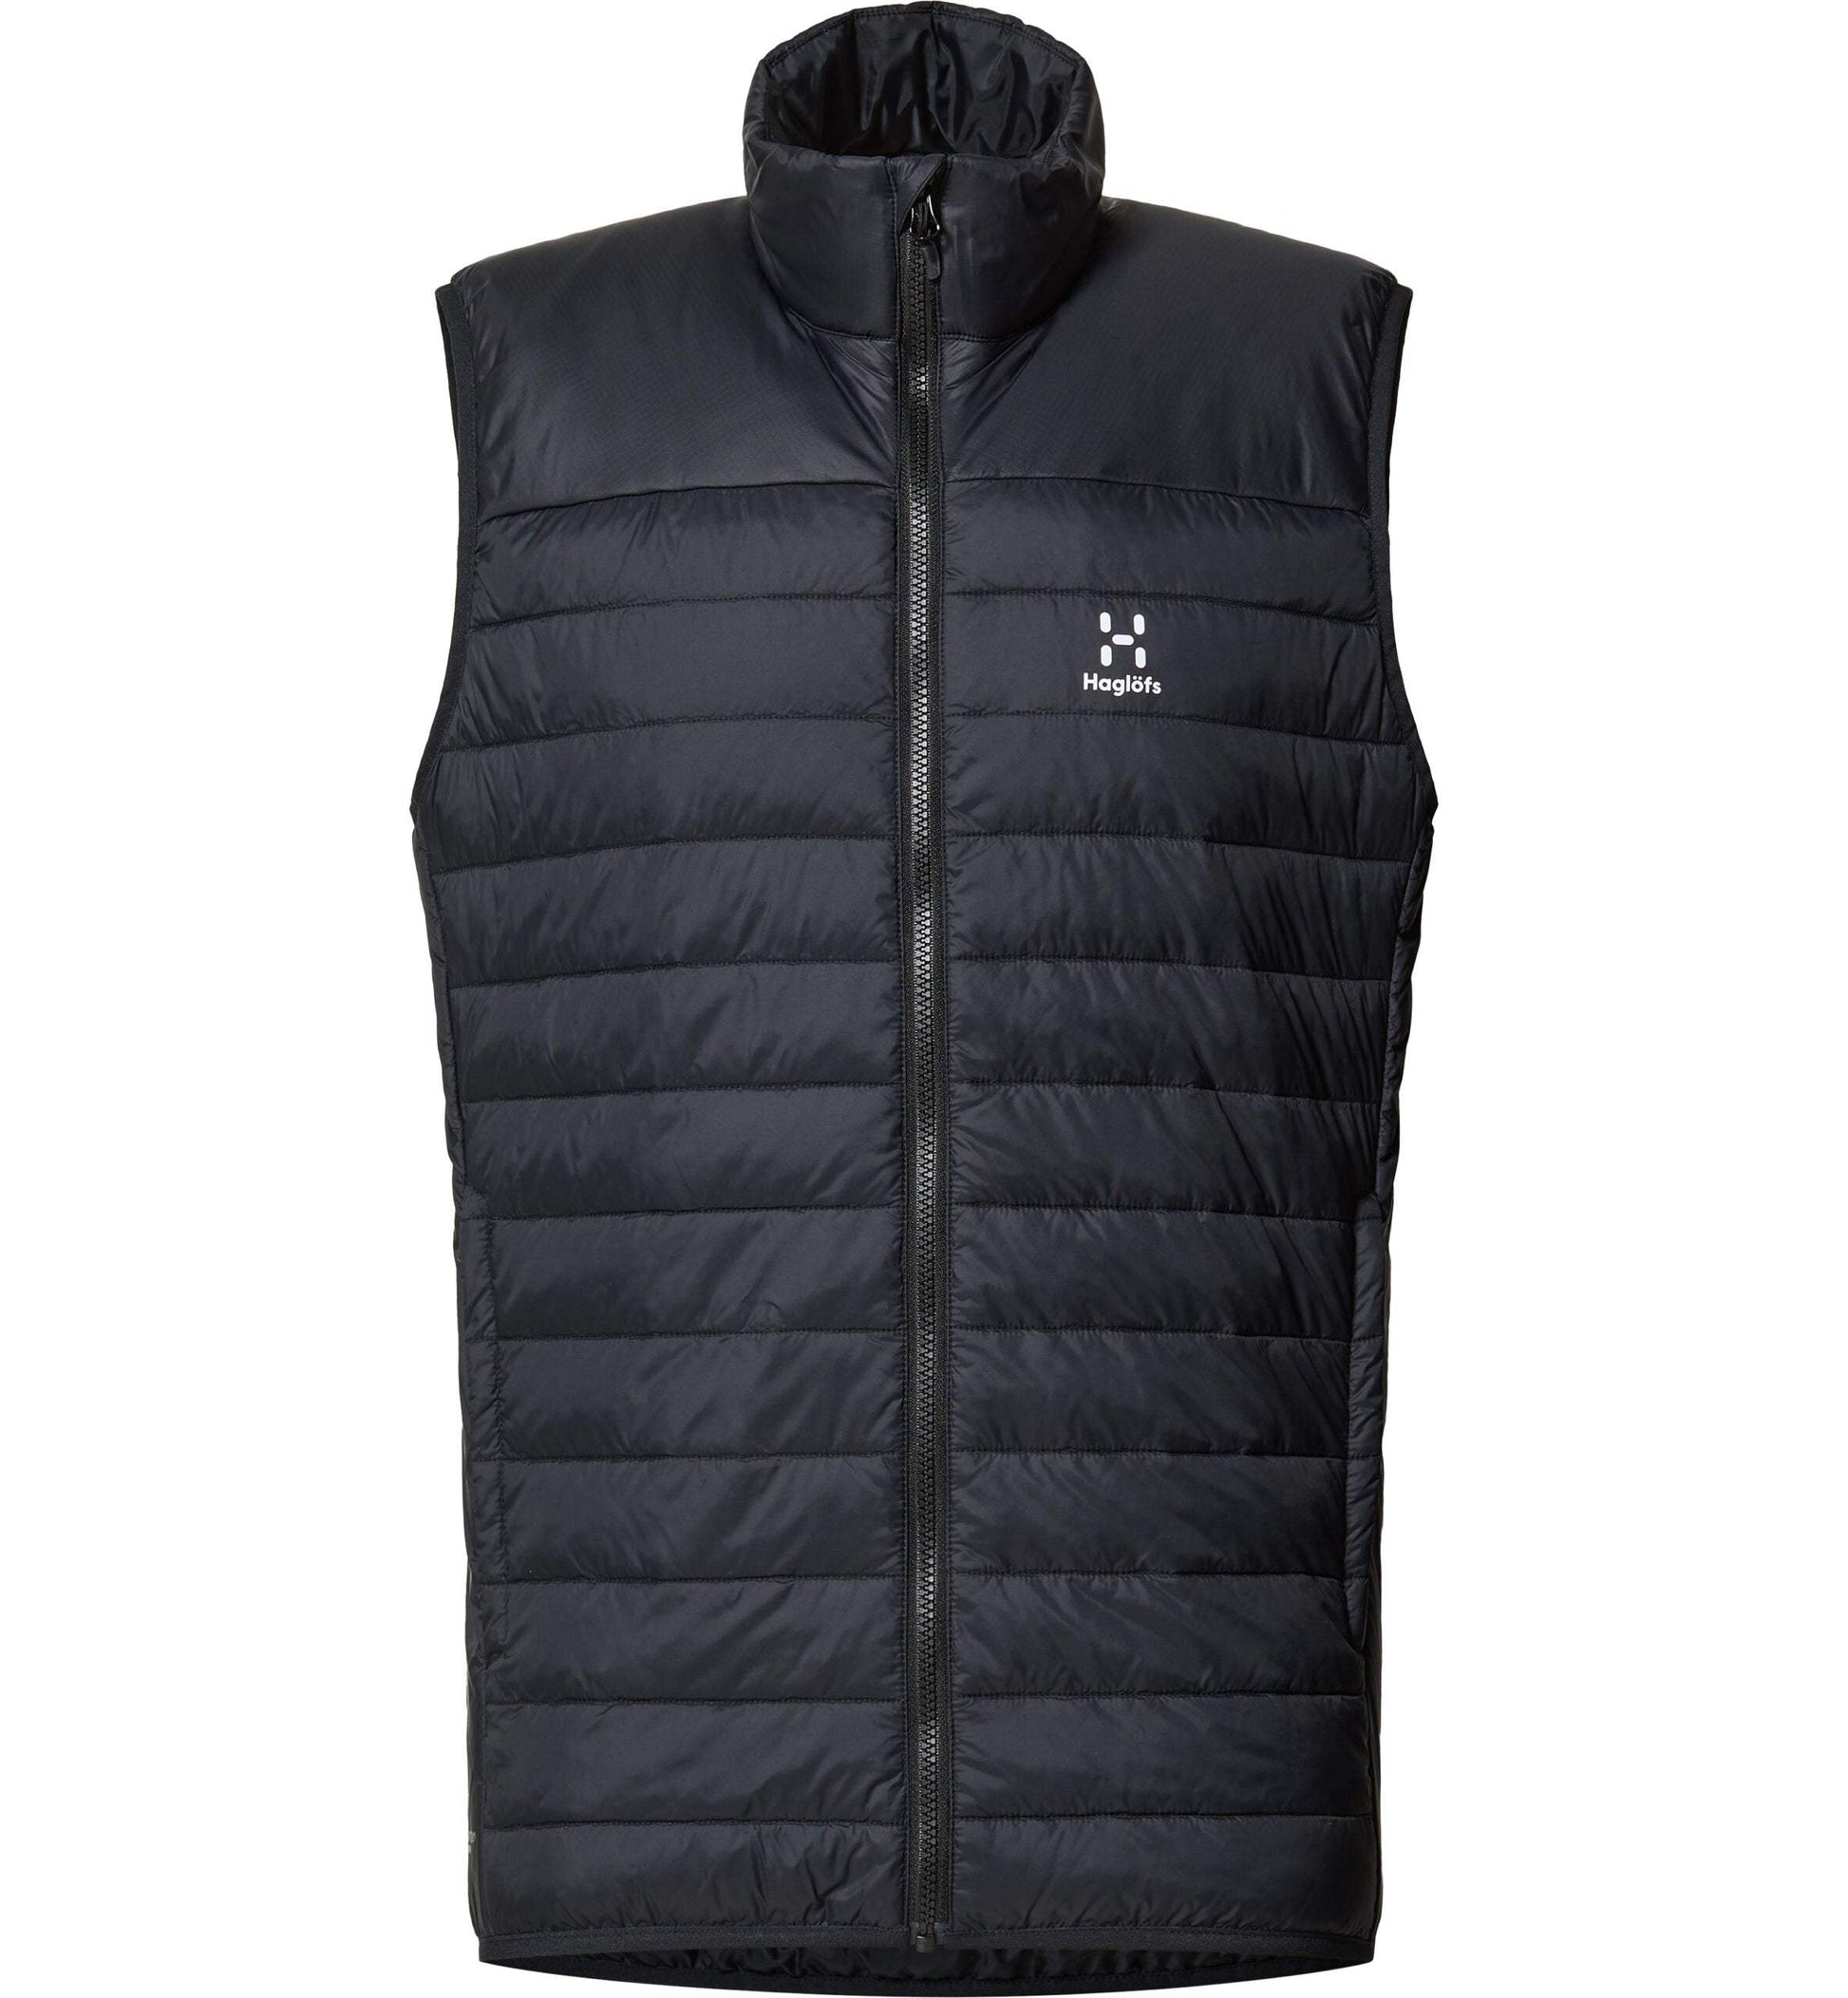 Haglofs Men’s Spire Mimic Vest - The Luxury Promotional Gifts Company Limited